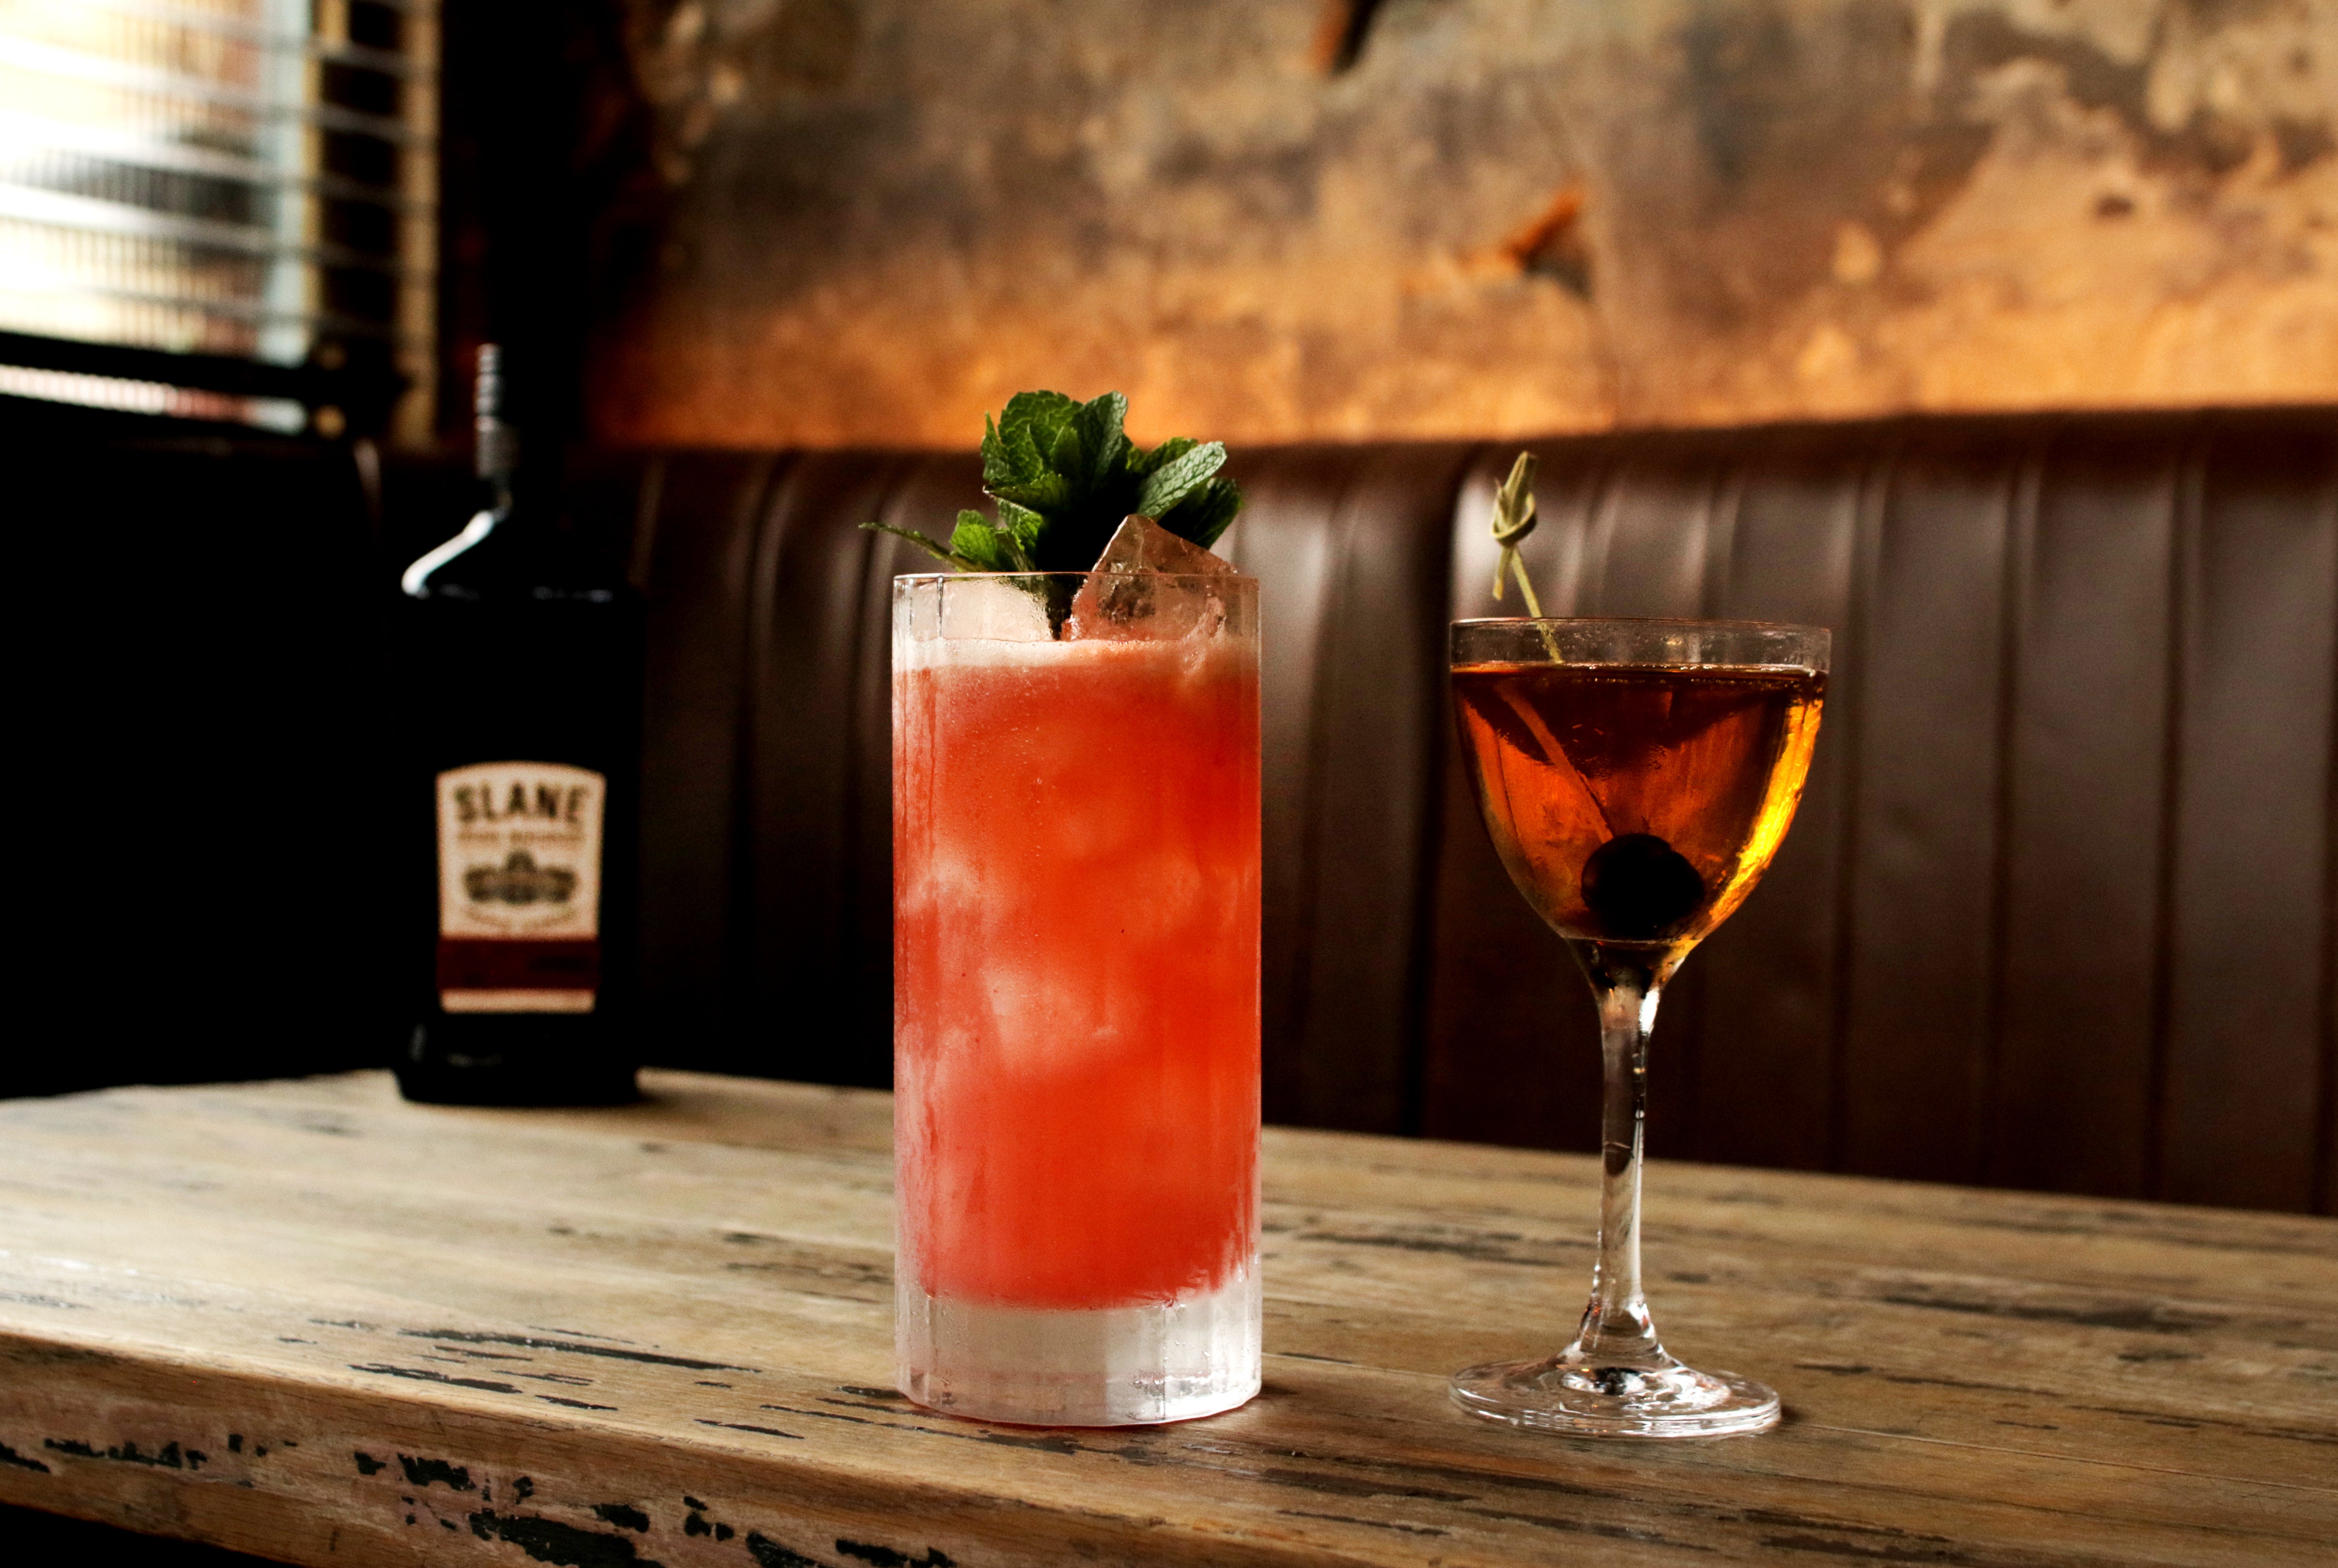 Enjoy a delicious Irish whiskey cocktail in the stylish surrounds of London’s Sun Tavern